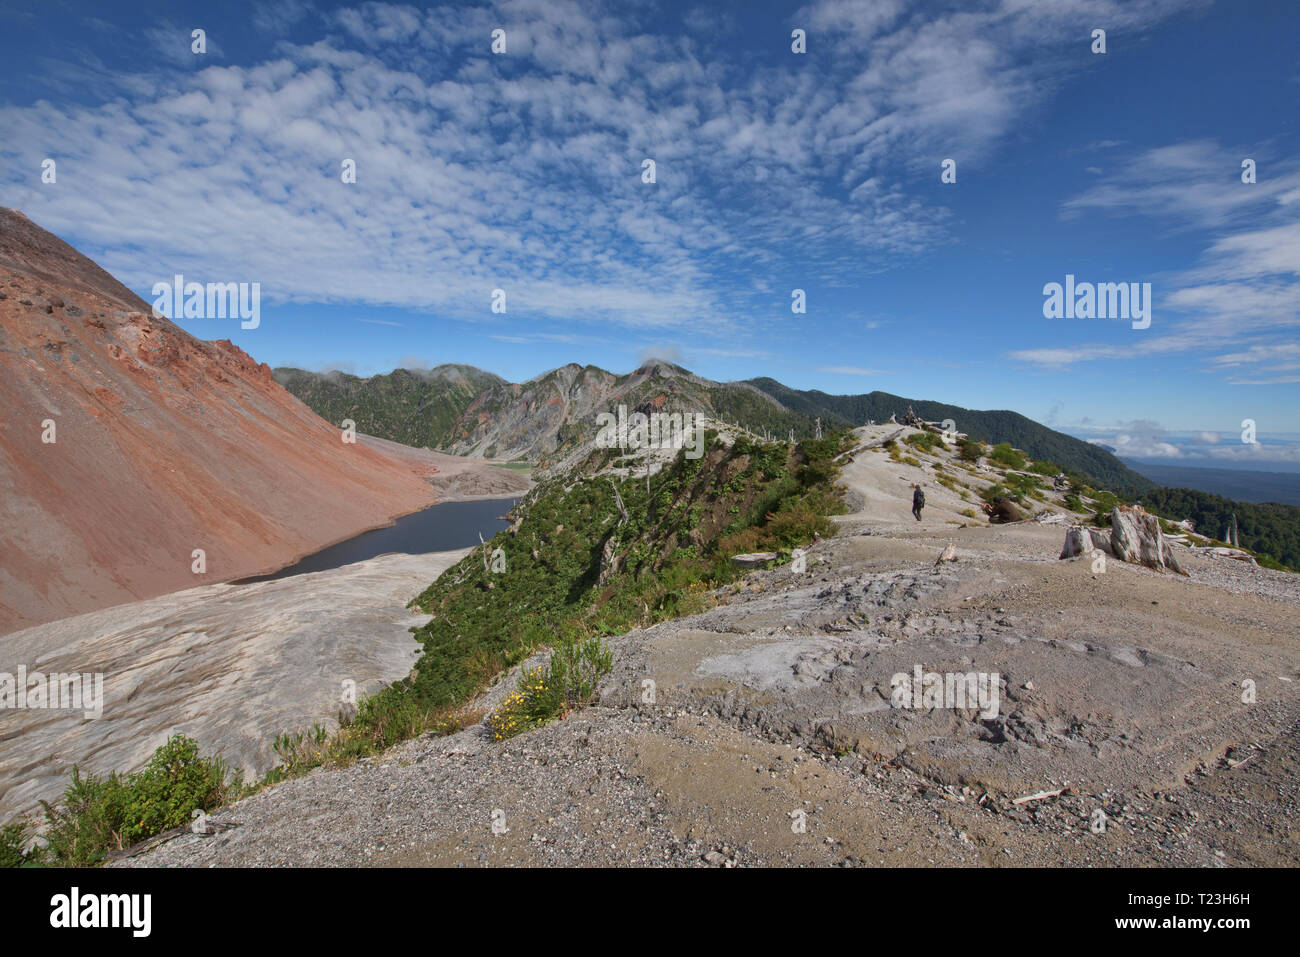 Edge of the caldera and scenery of Chaitén volcano, Pumalin National Park, Patagonia, Chaitén, Chile Stock Photo